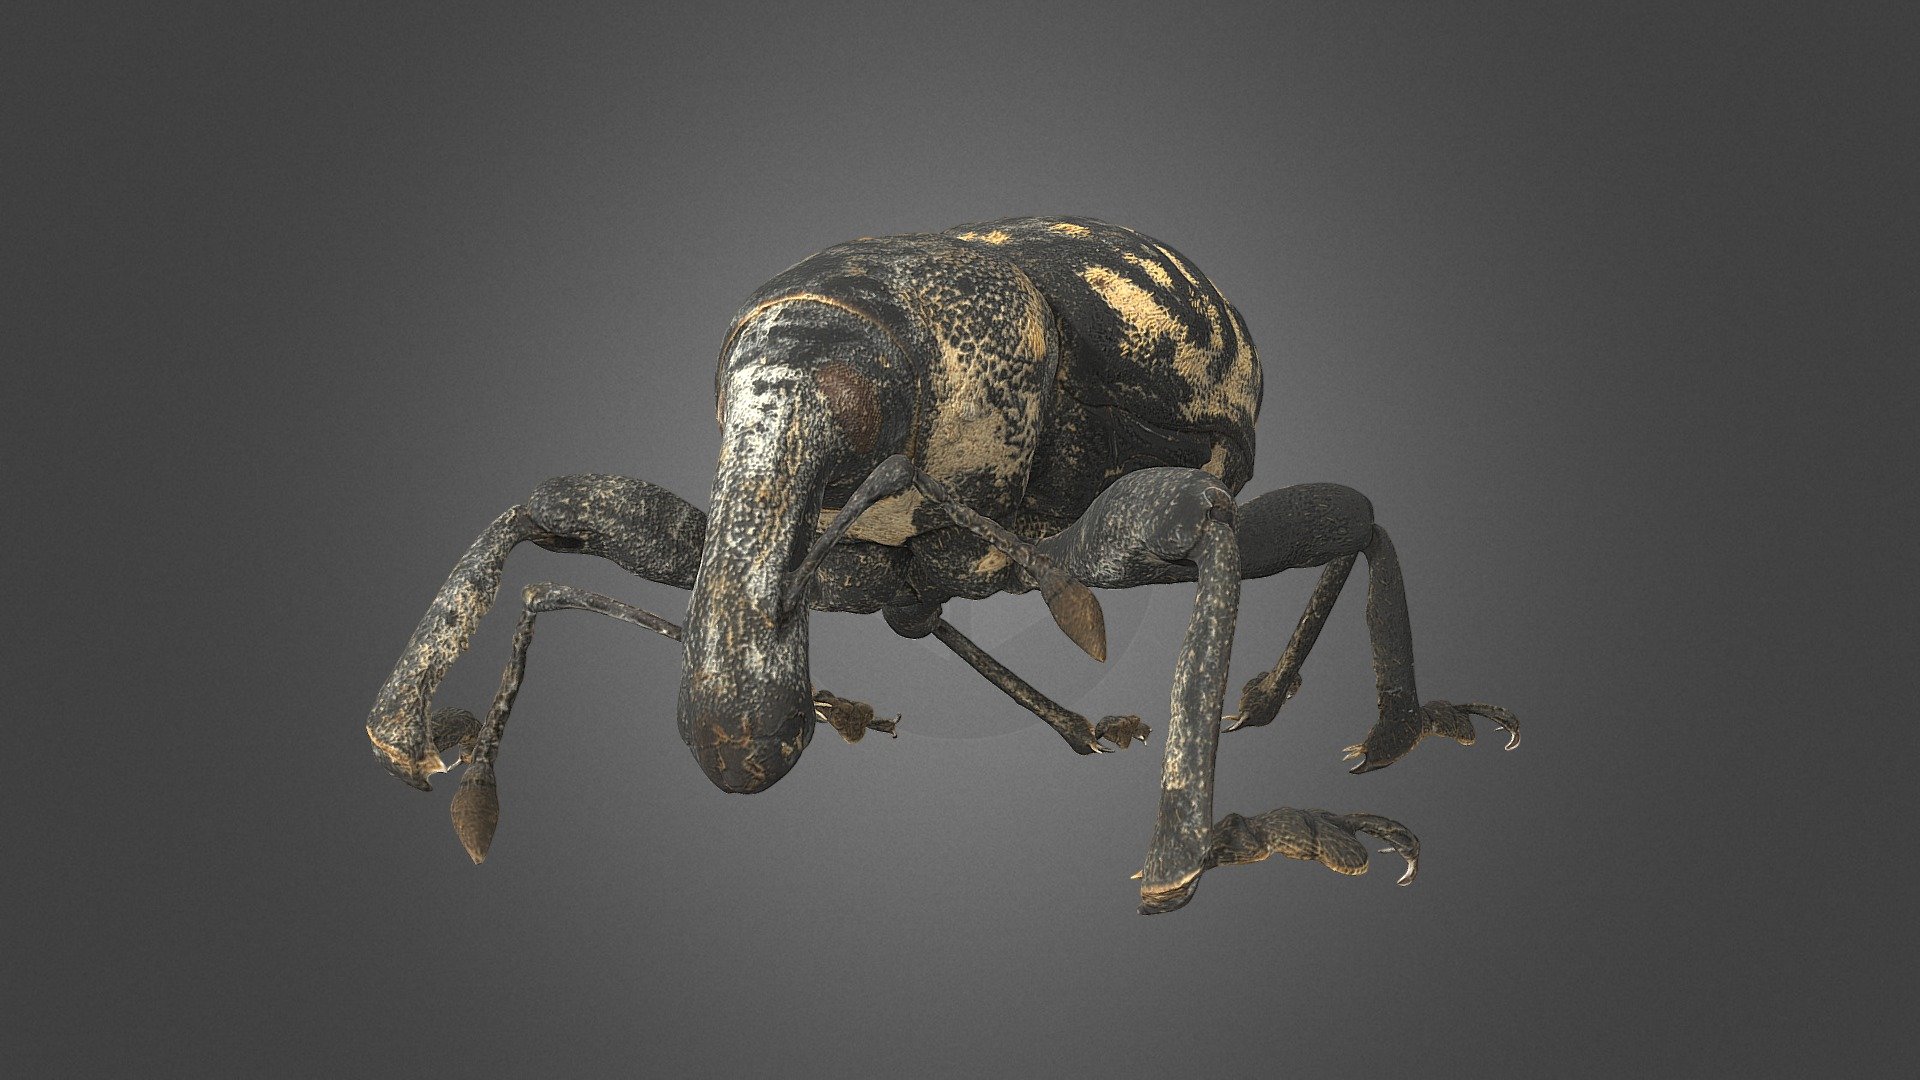 What a beautiful weevil - digidized with #DISC3D. This is the largest weevil species in Central Europe, living in montane areas 3d model